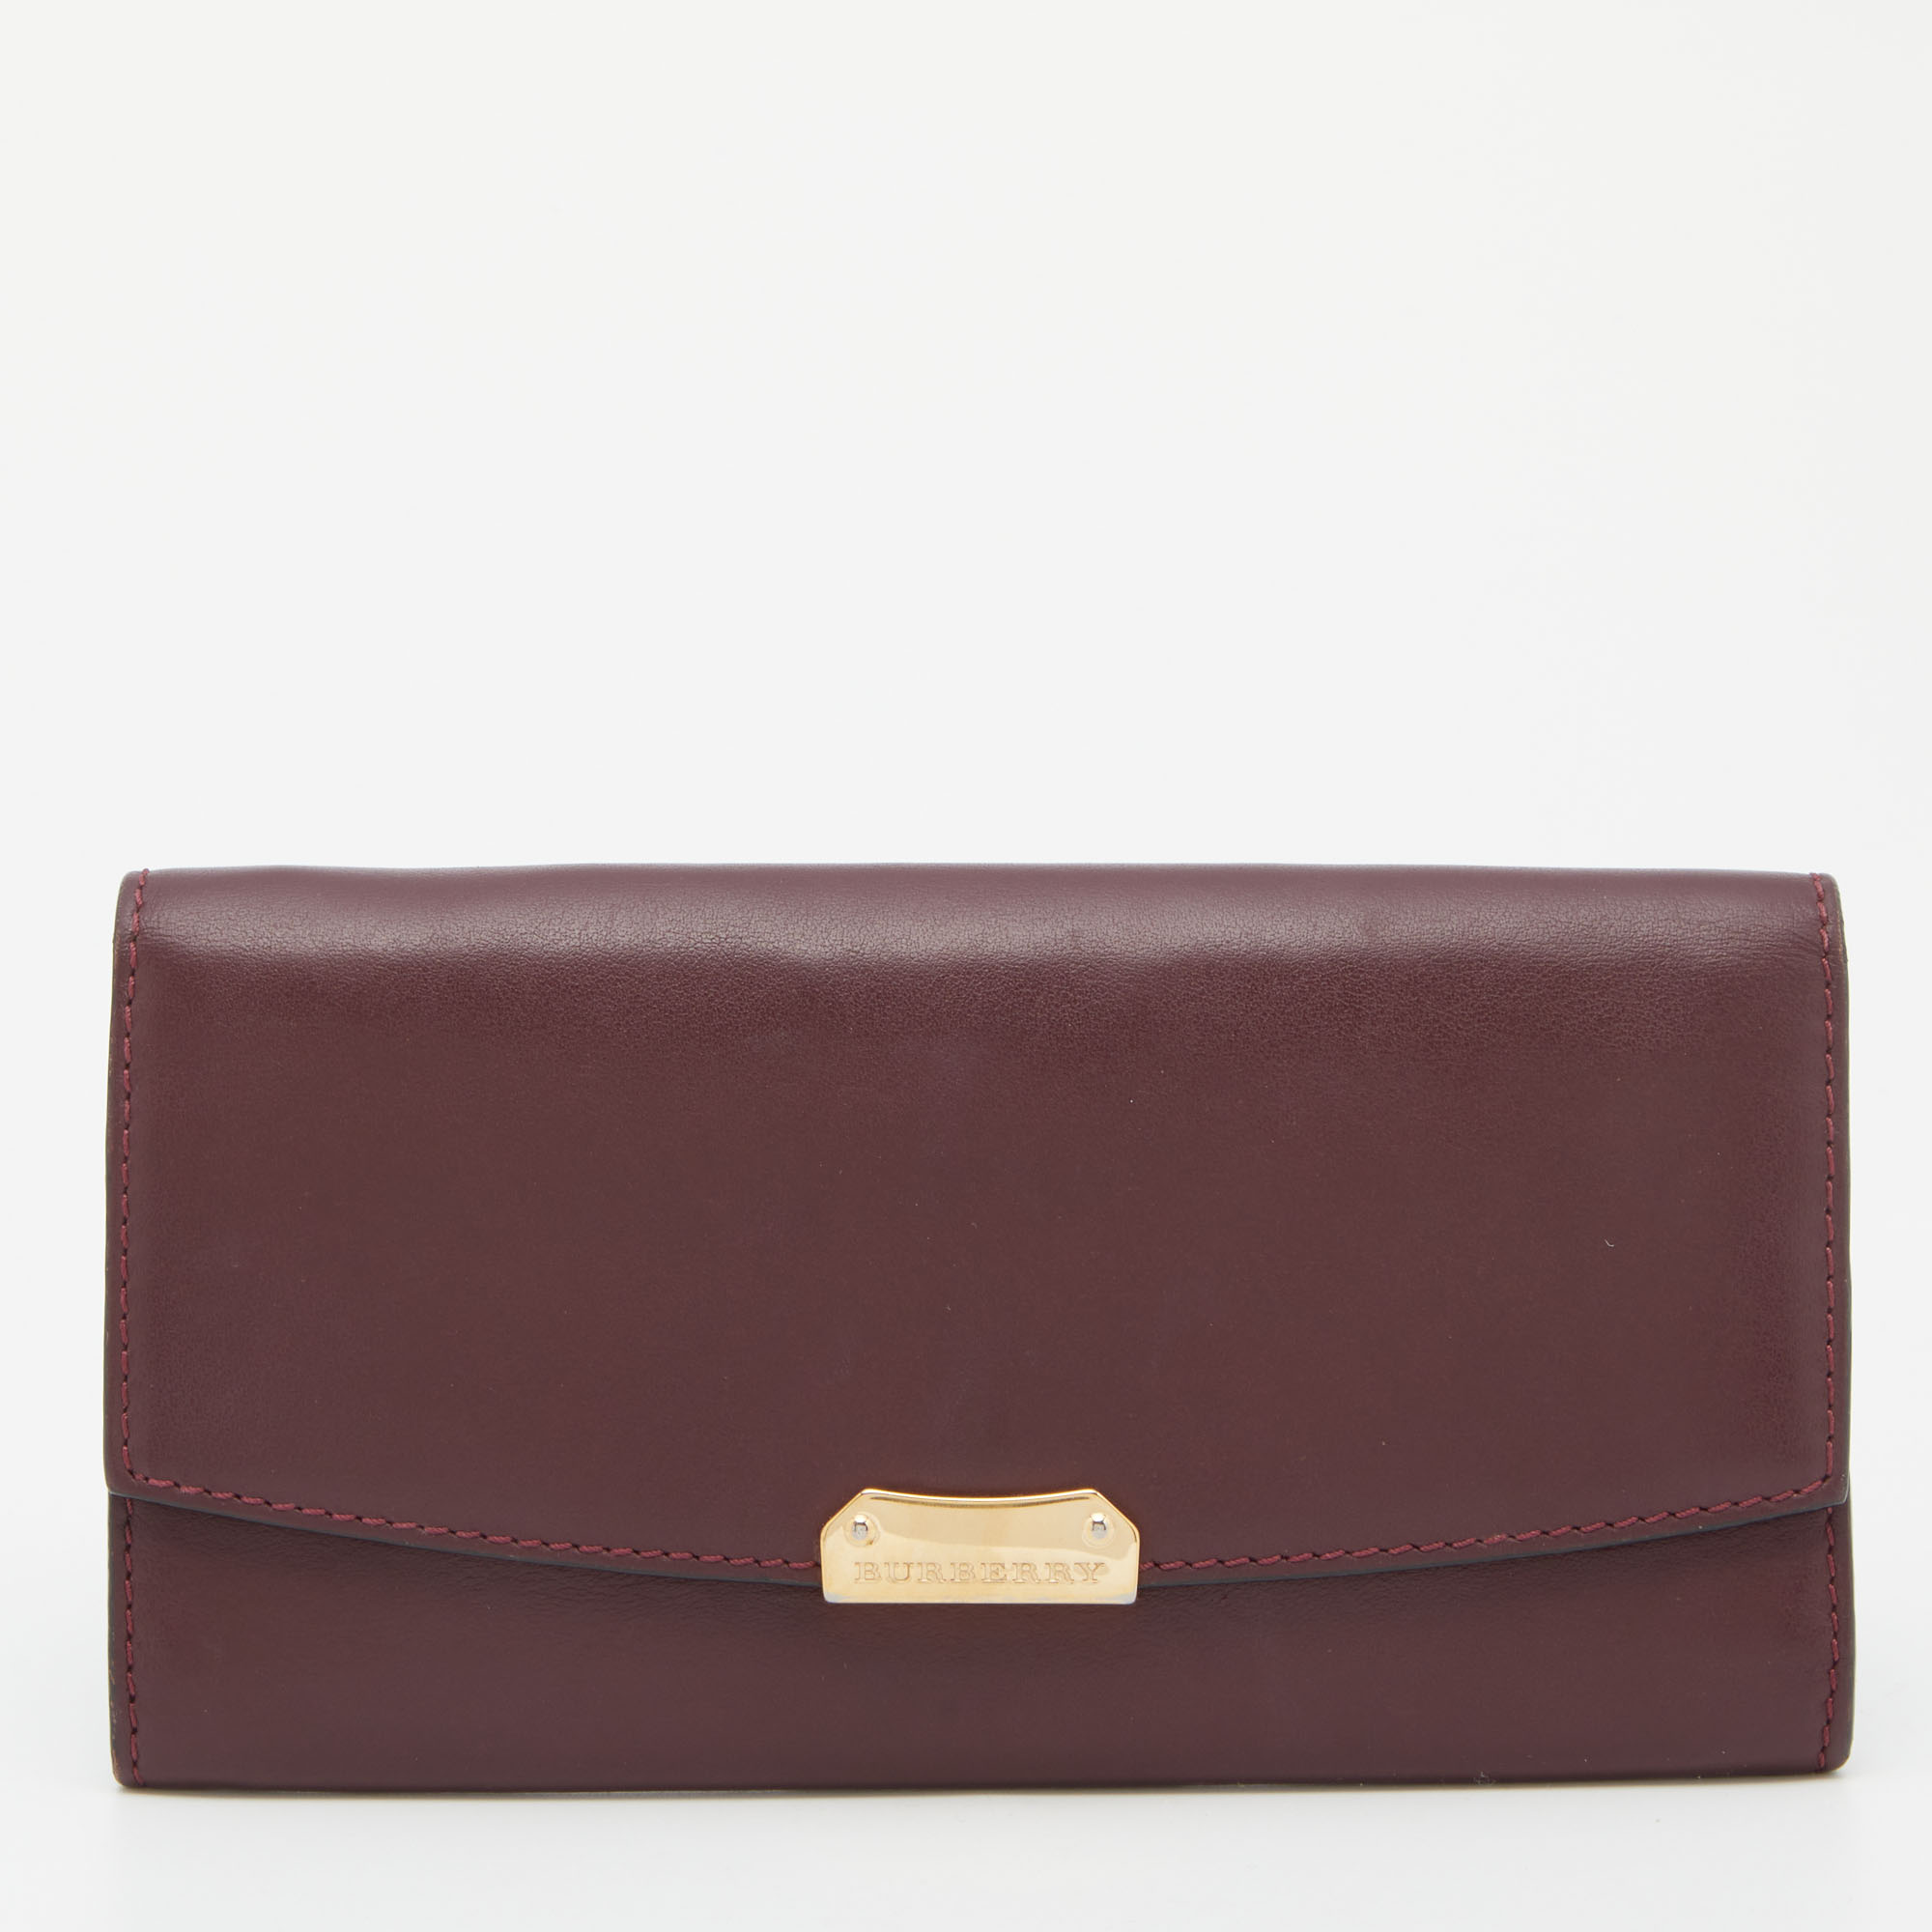 

Burberry Burgundy Leather Flap Continental Wallet